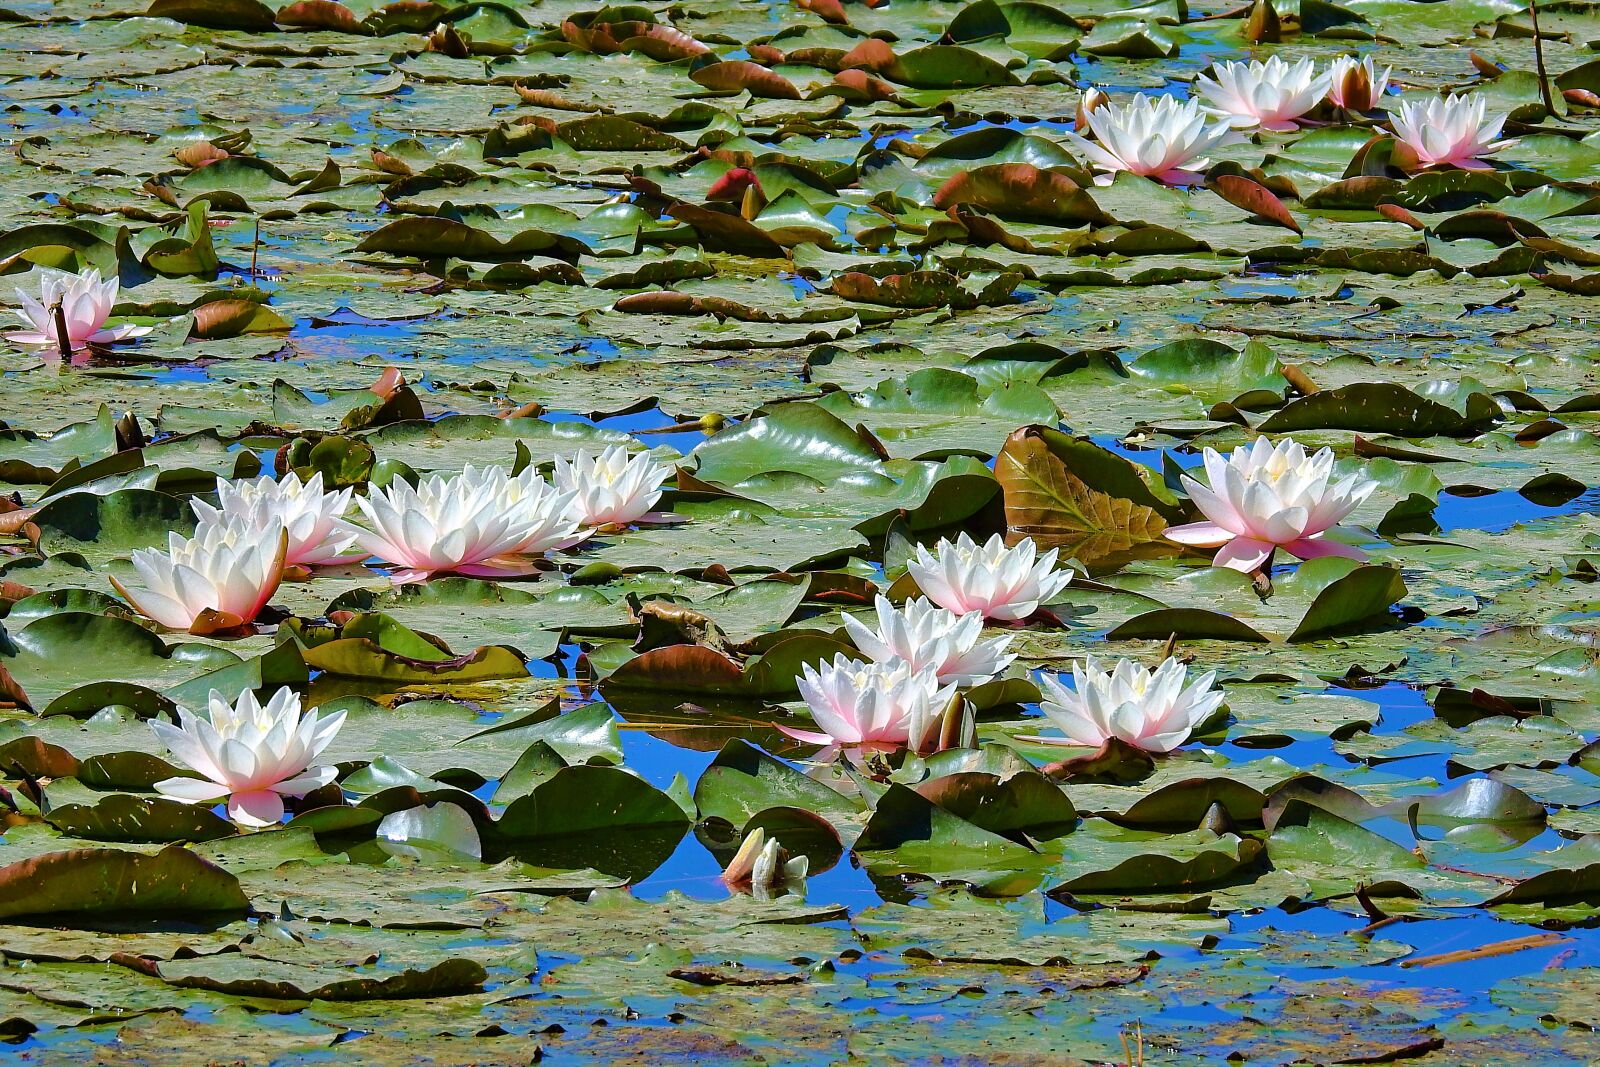 Nikon Coolpix P900 sample photo. Water lilies, a miracle photography